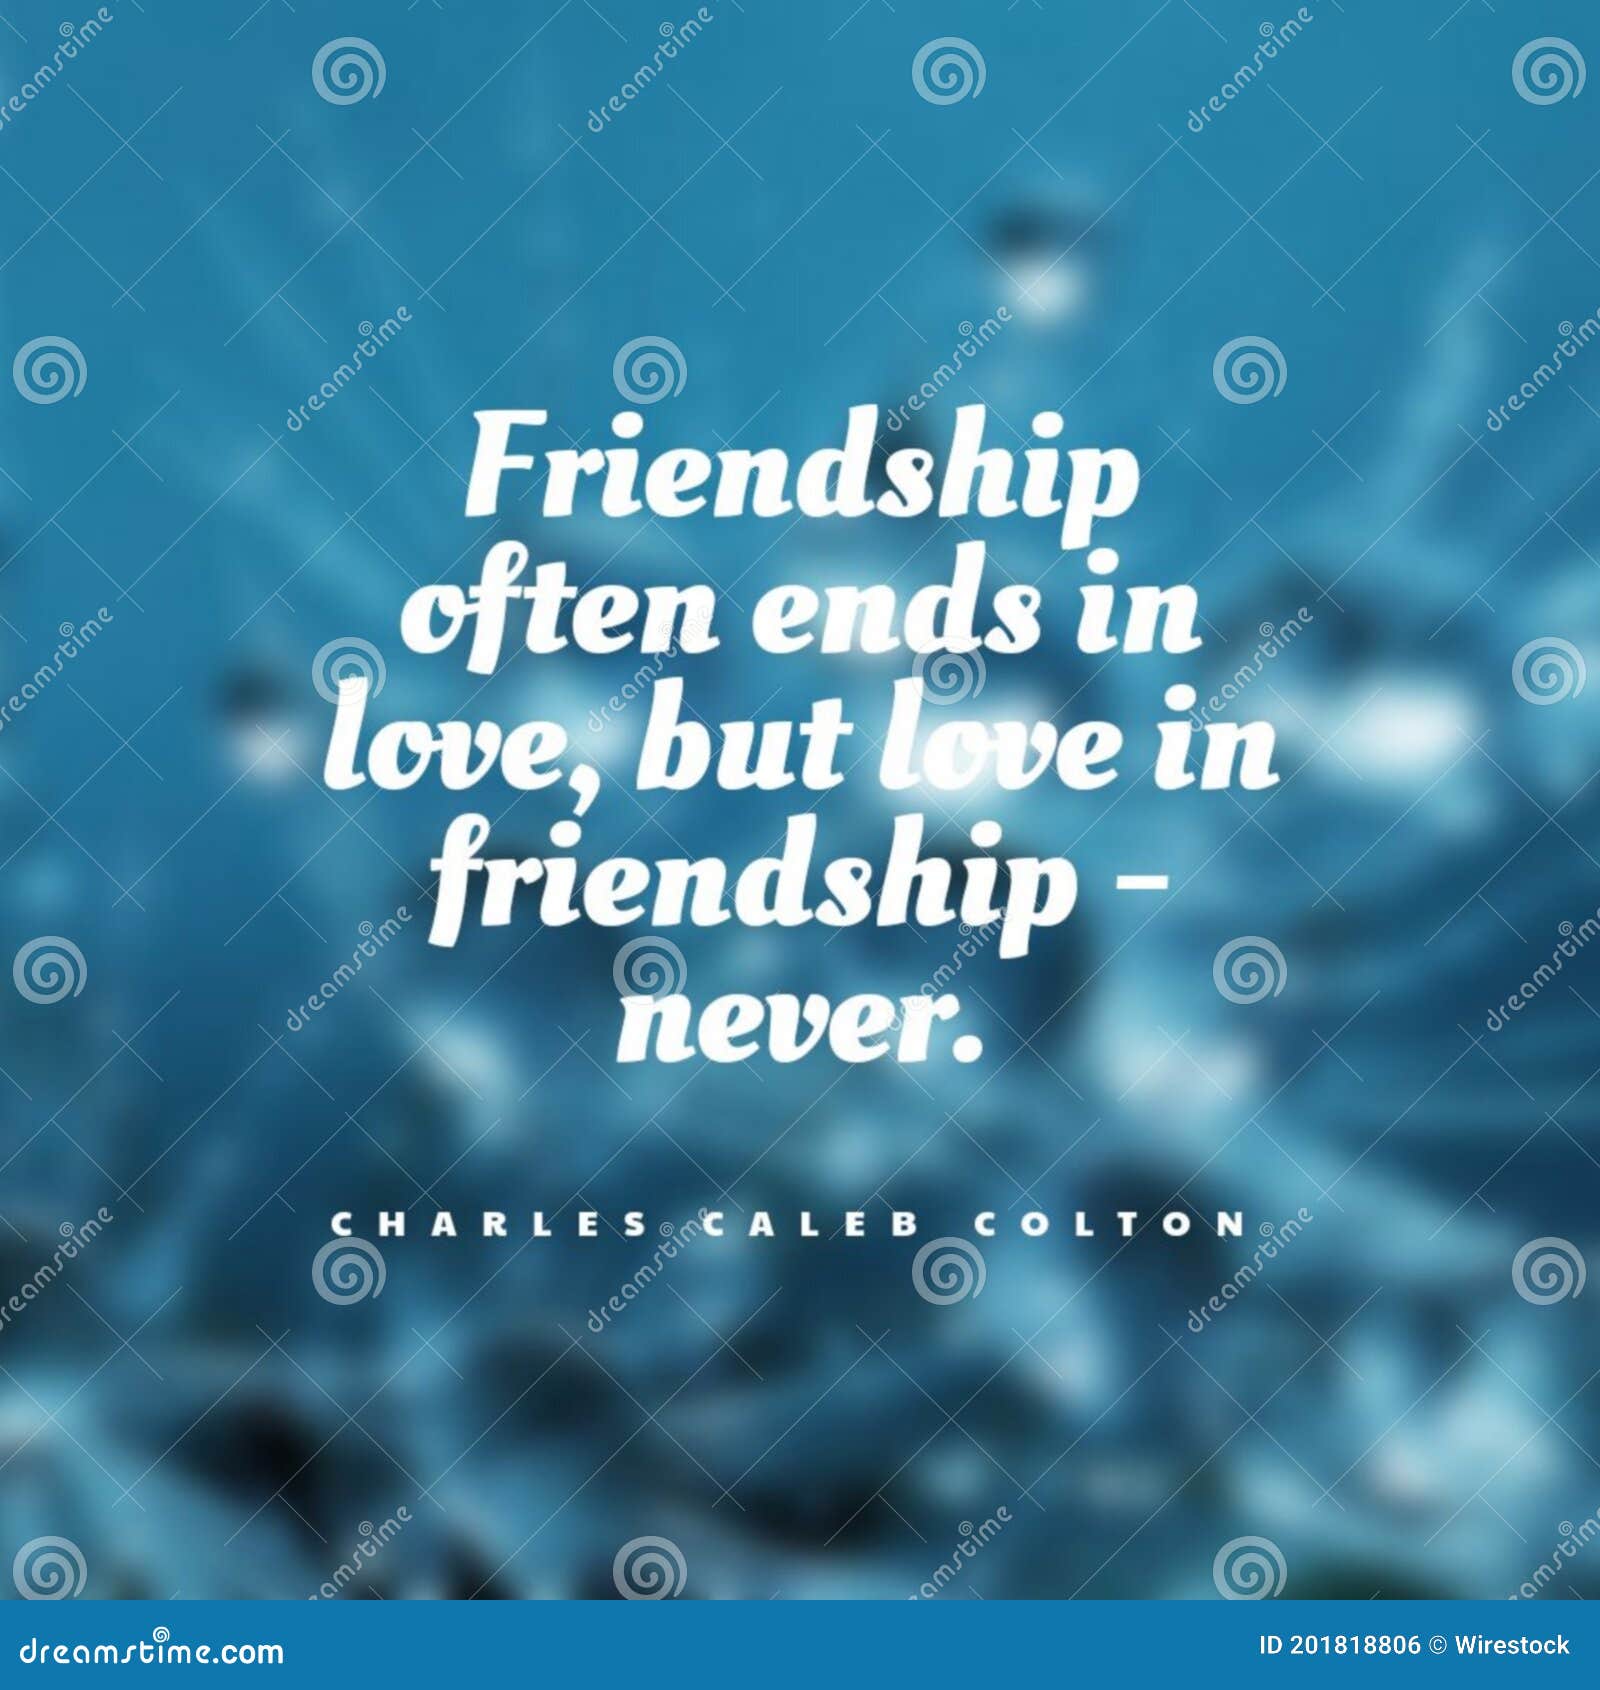 quotes on friendship and love